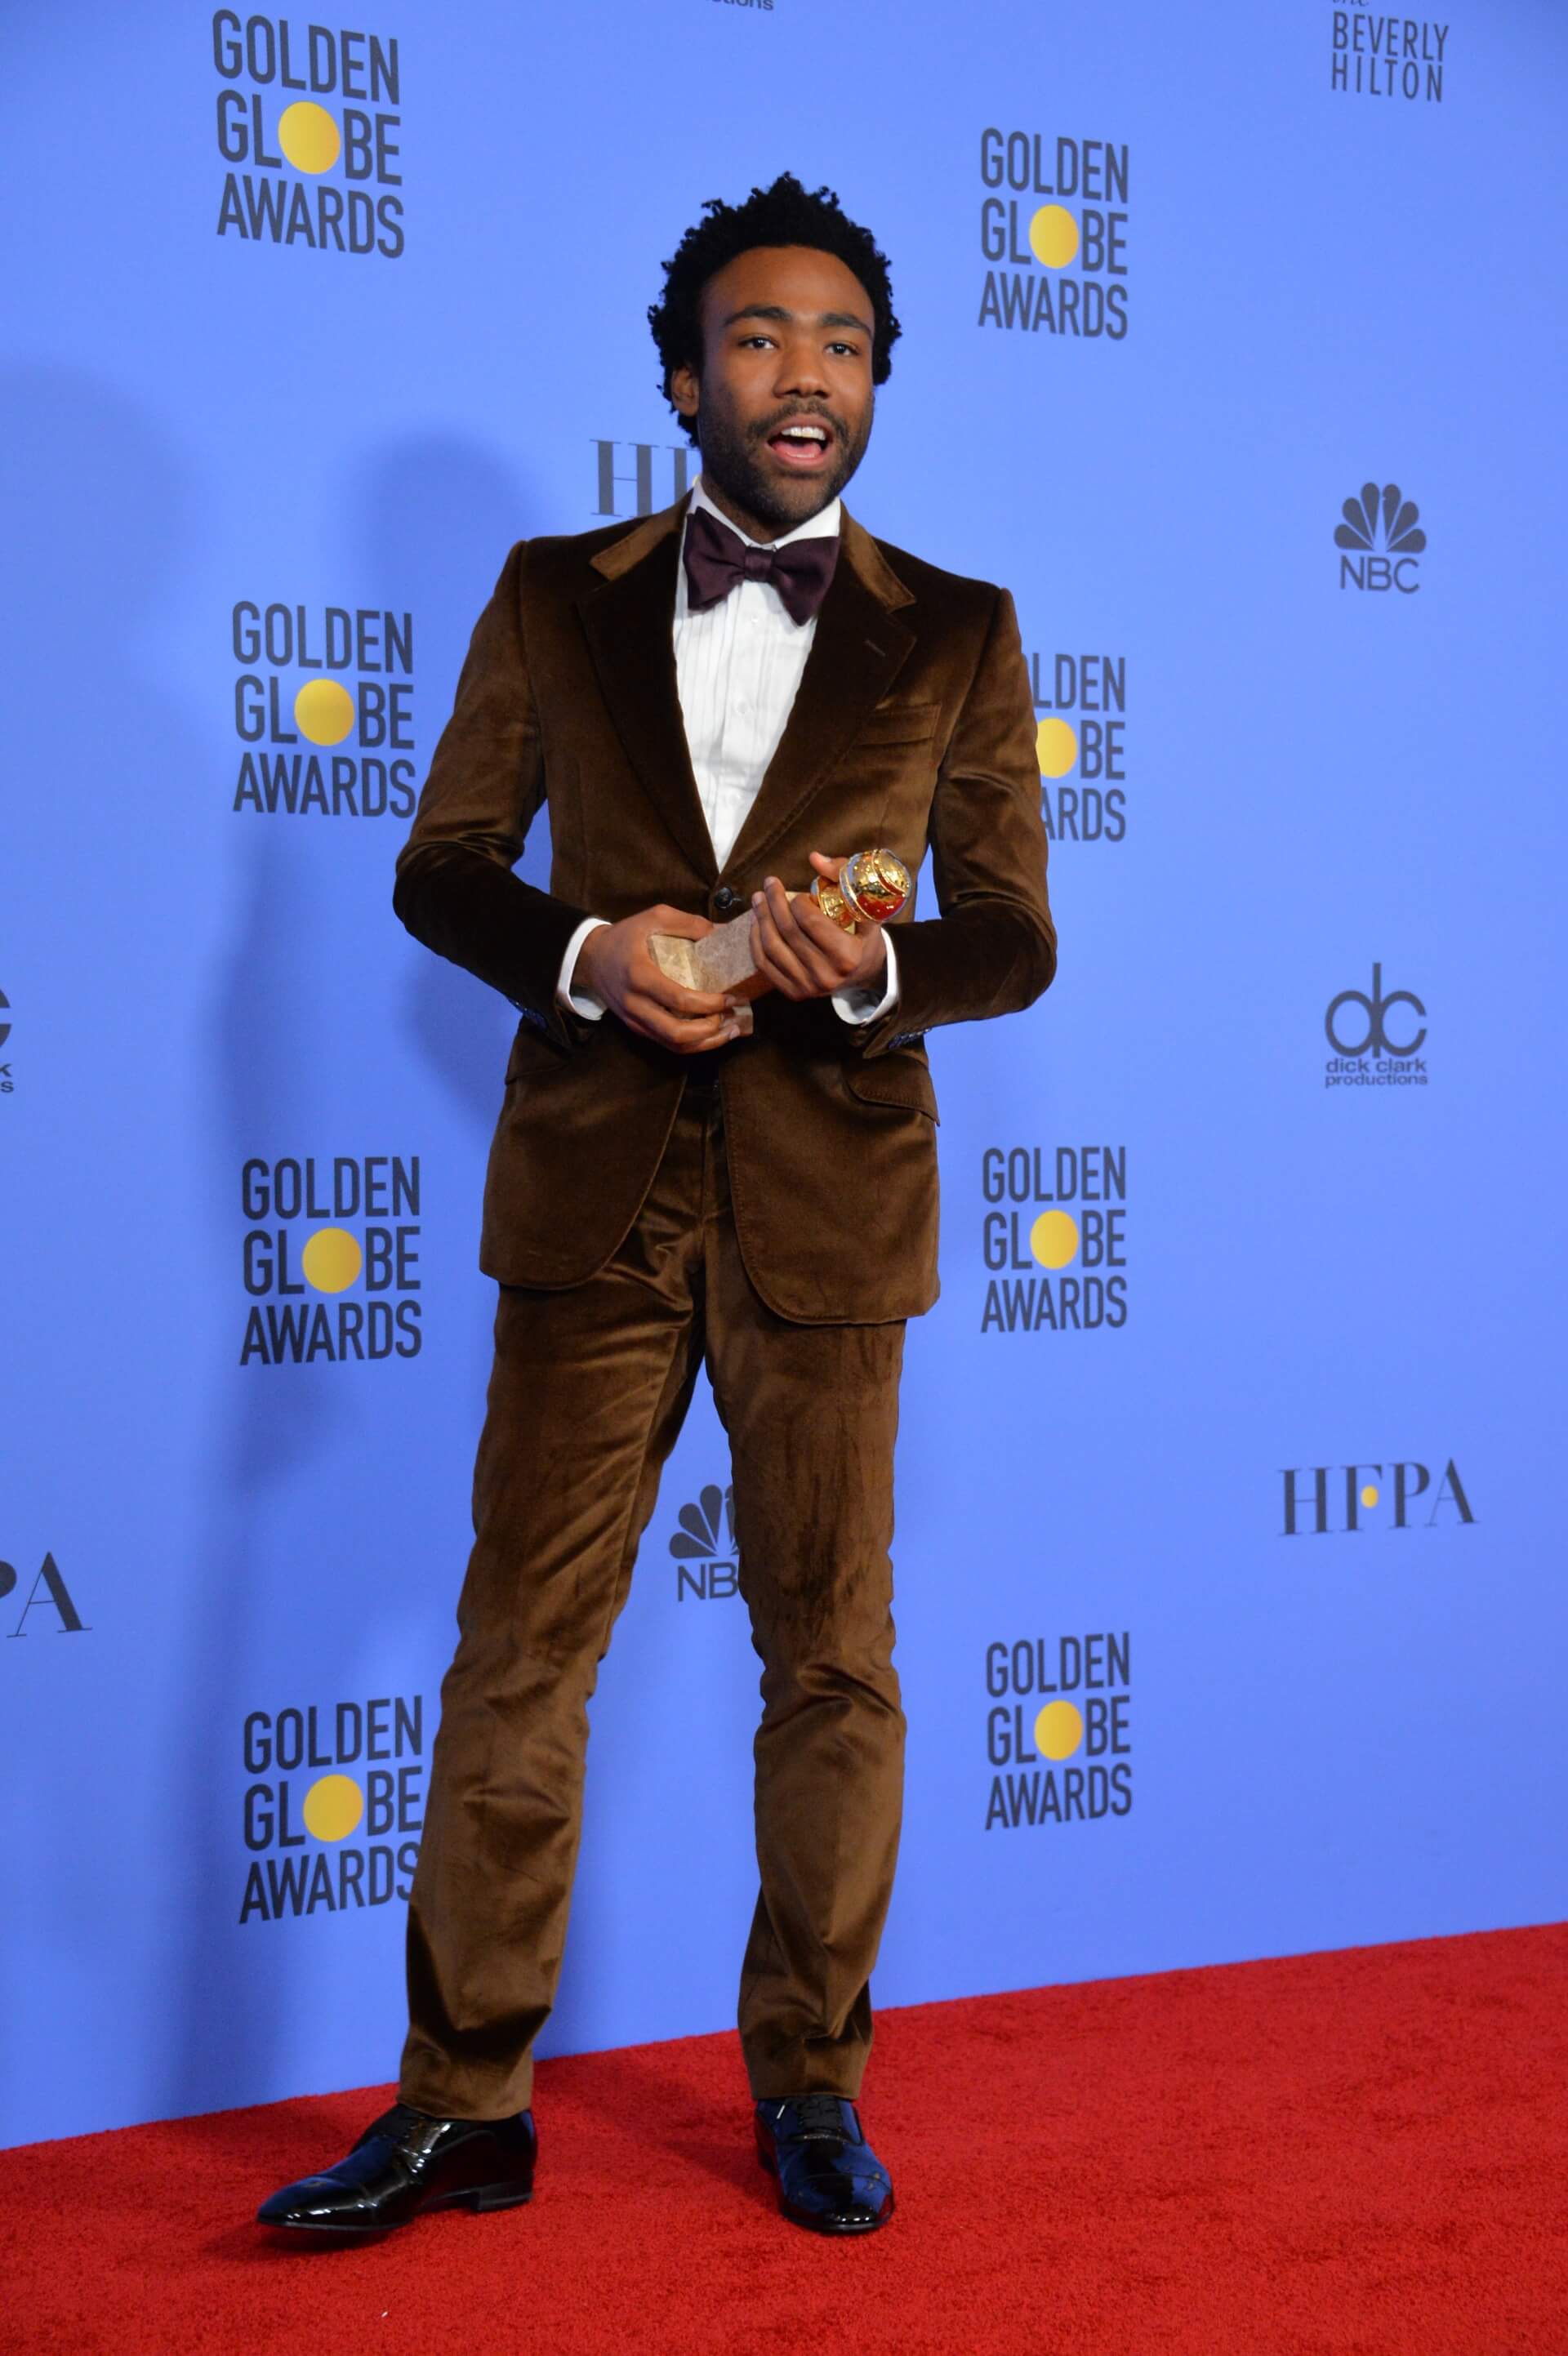 Donald Glover at the 74th Golden Globe Awards